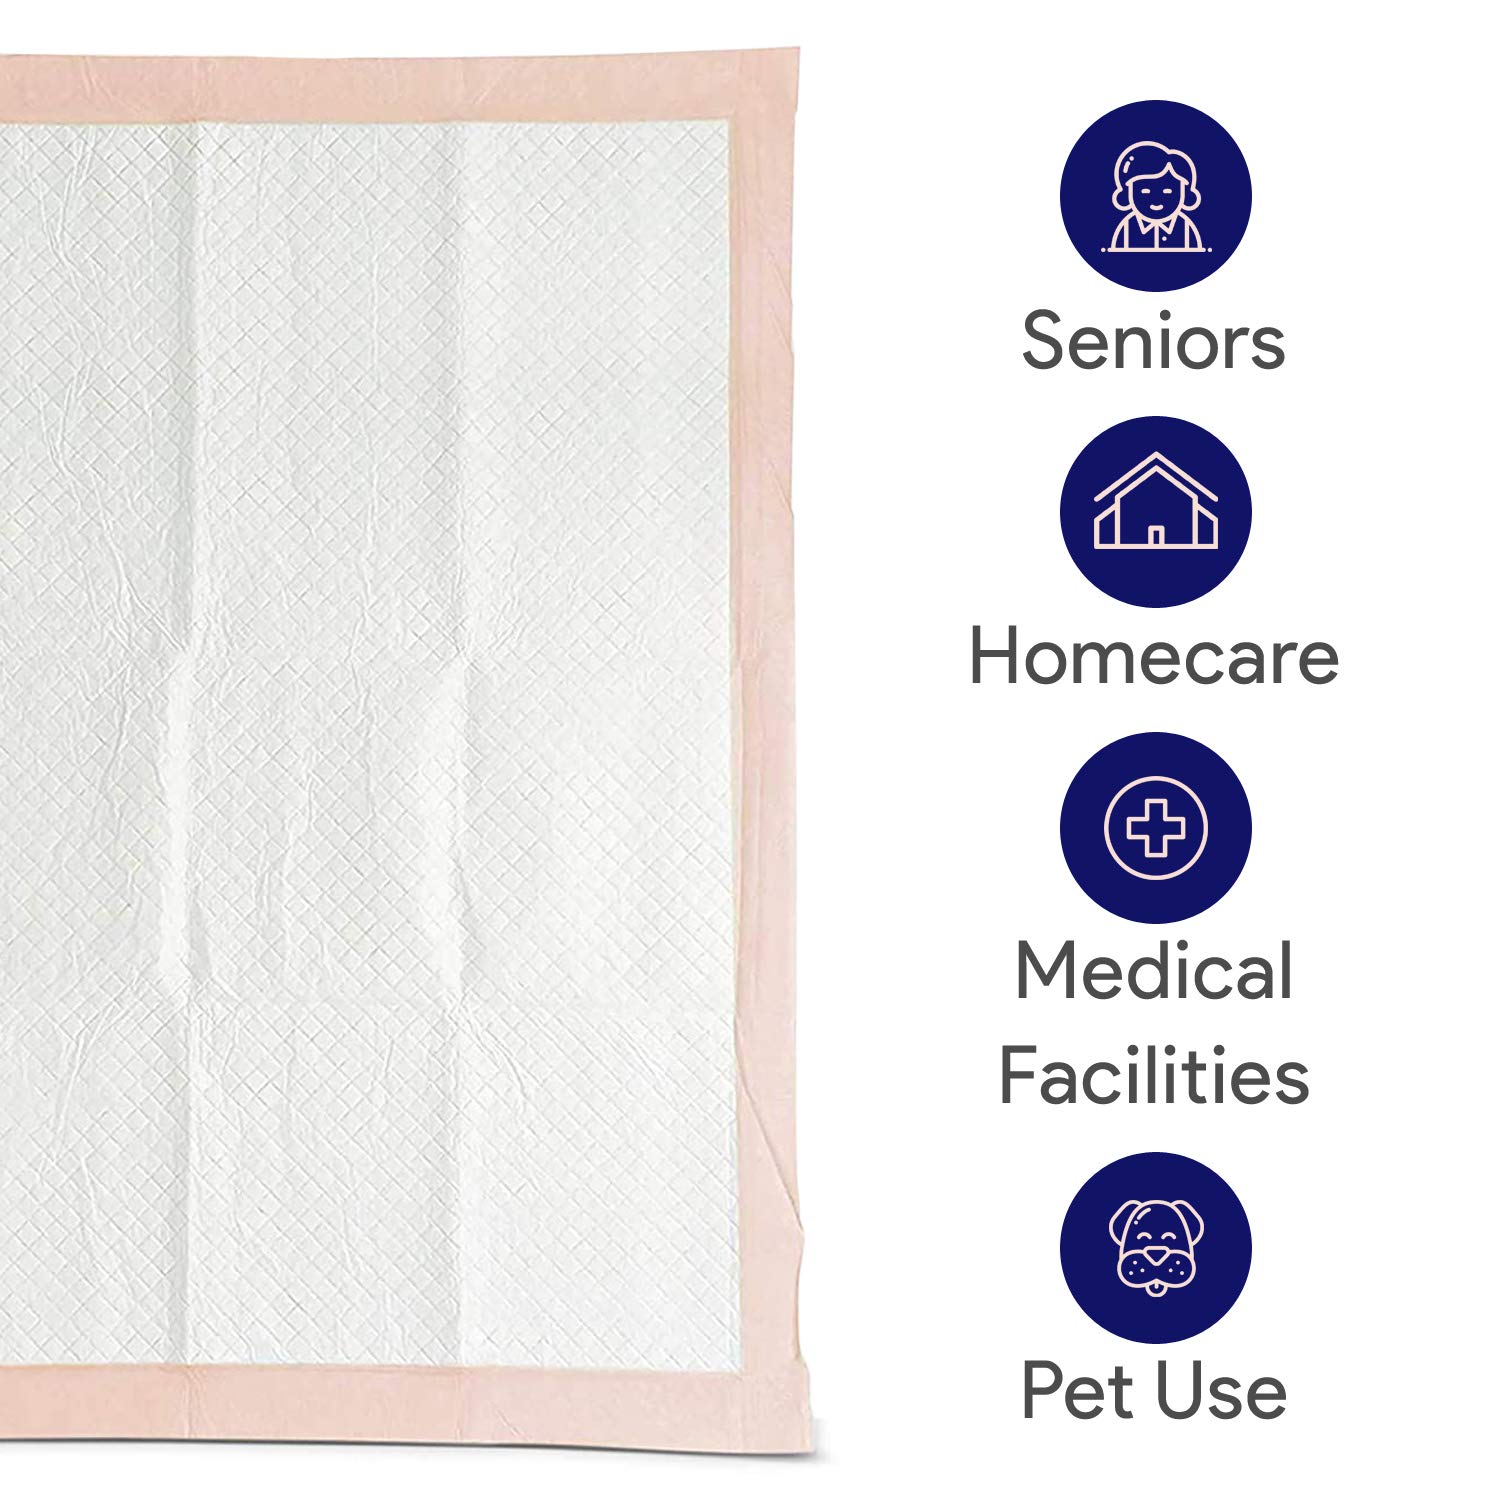 Premium Disposable Chucks Underpads, 30" x 36" - Highly Absorbent Bed Pads for Incontinence and Senior Care - Peach Color - Leak Proof Protection